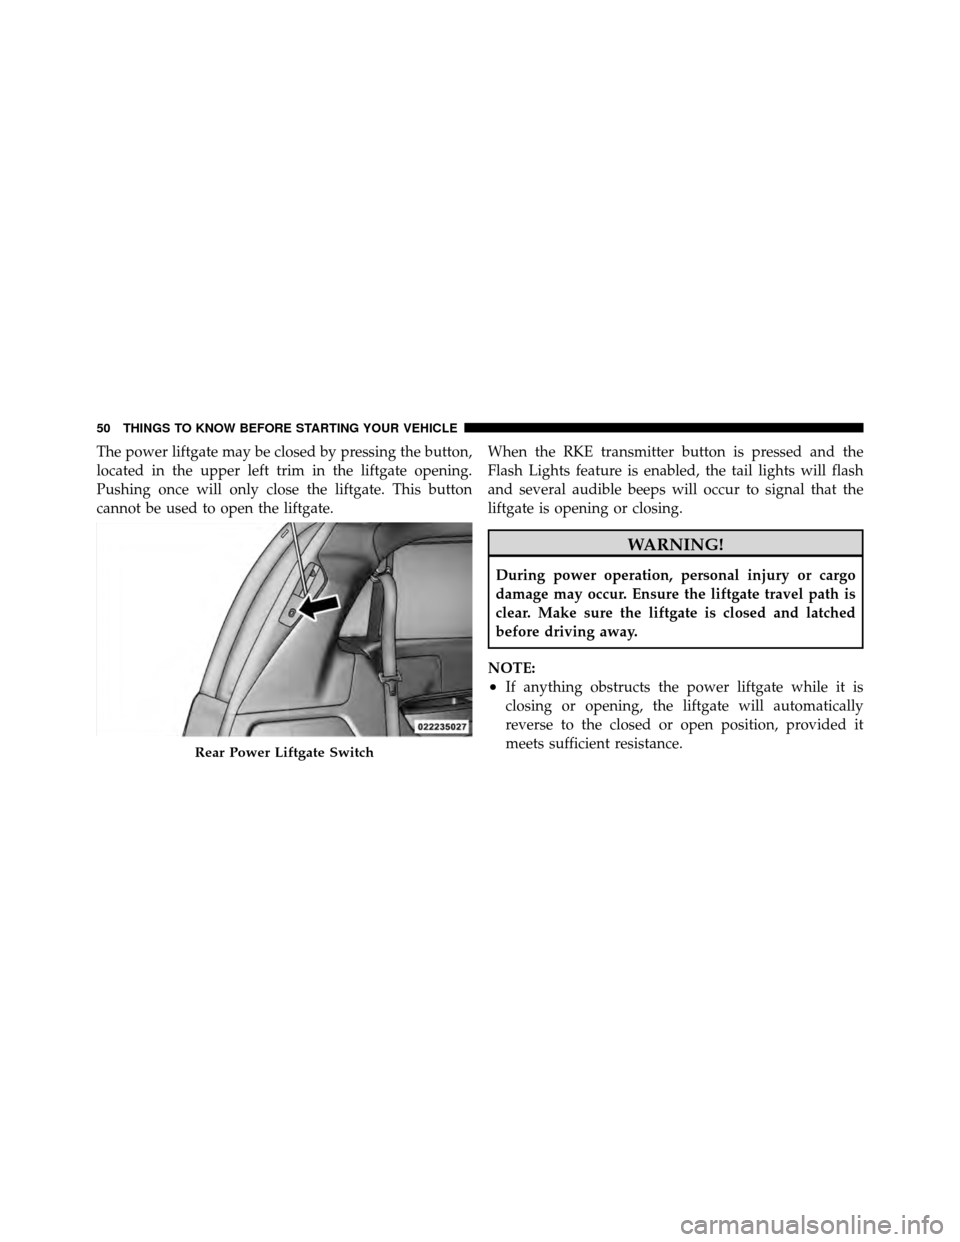 DODGE GRAND CARAVAN 2012 5.G Workshop Manual The power liftgate may be closed by pressing the button,
located in the upper left trim in the liftgate opening.
Pushing once will only close the liftgate. This button
cannot be used to open the liftg